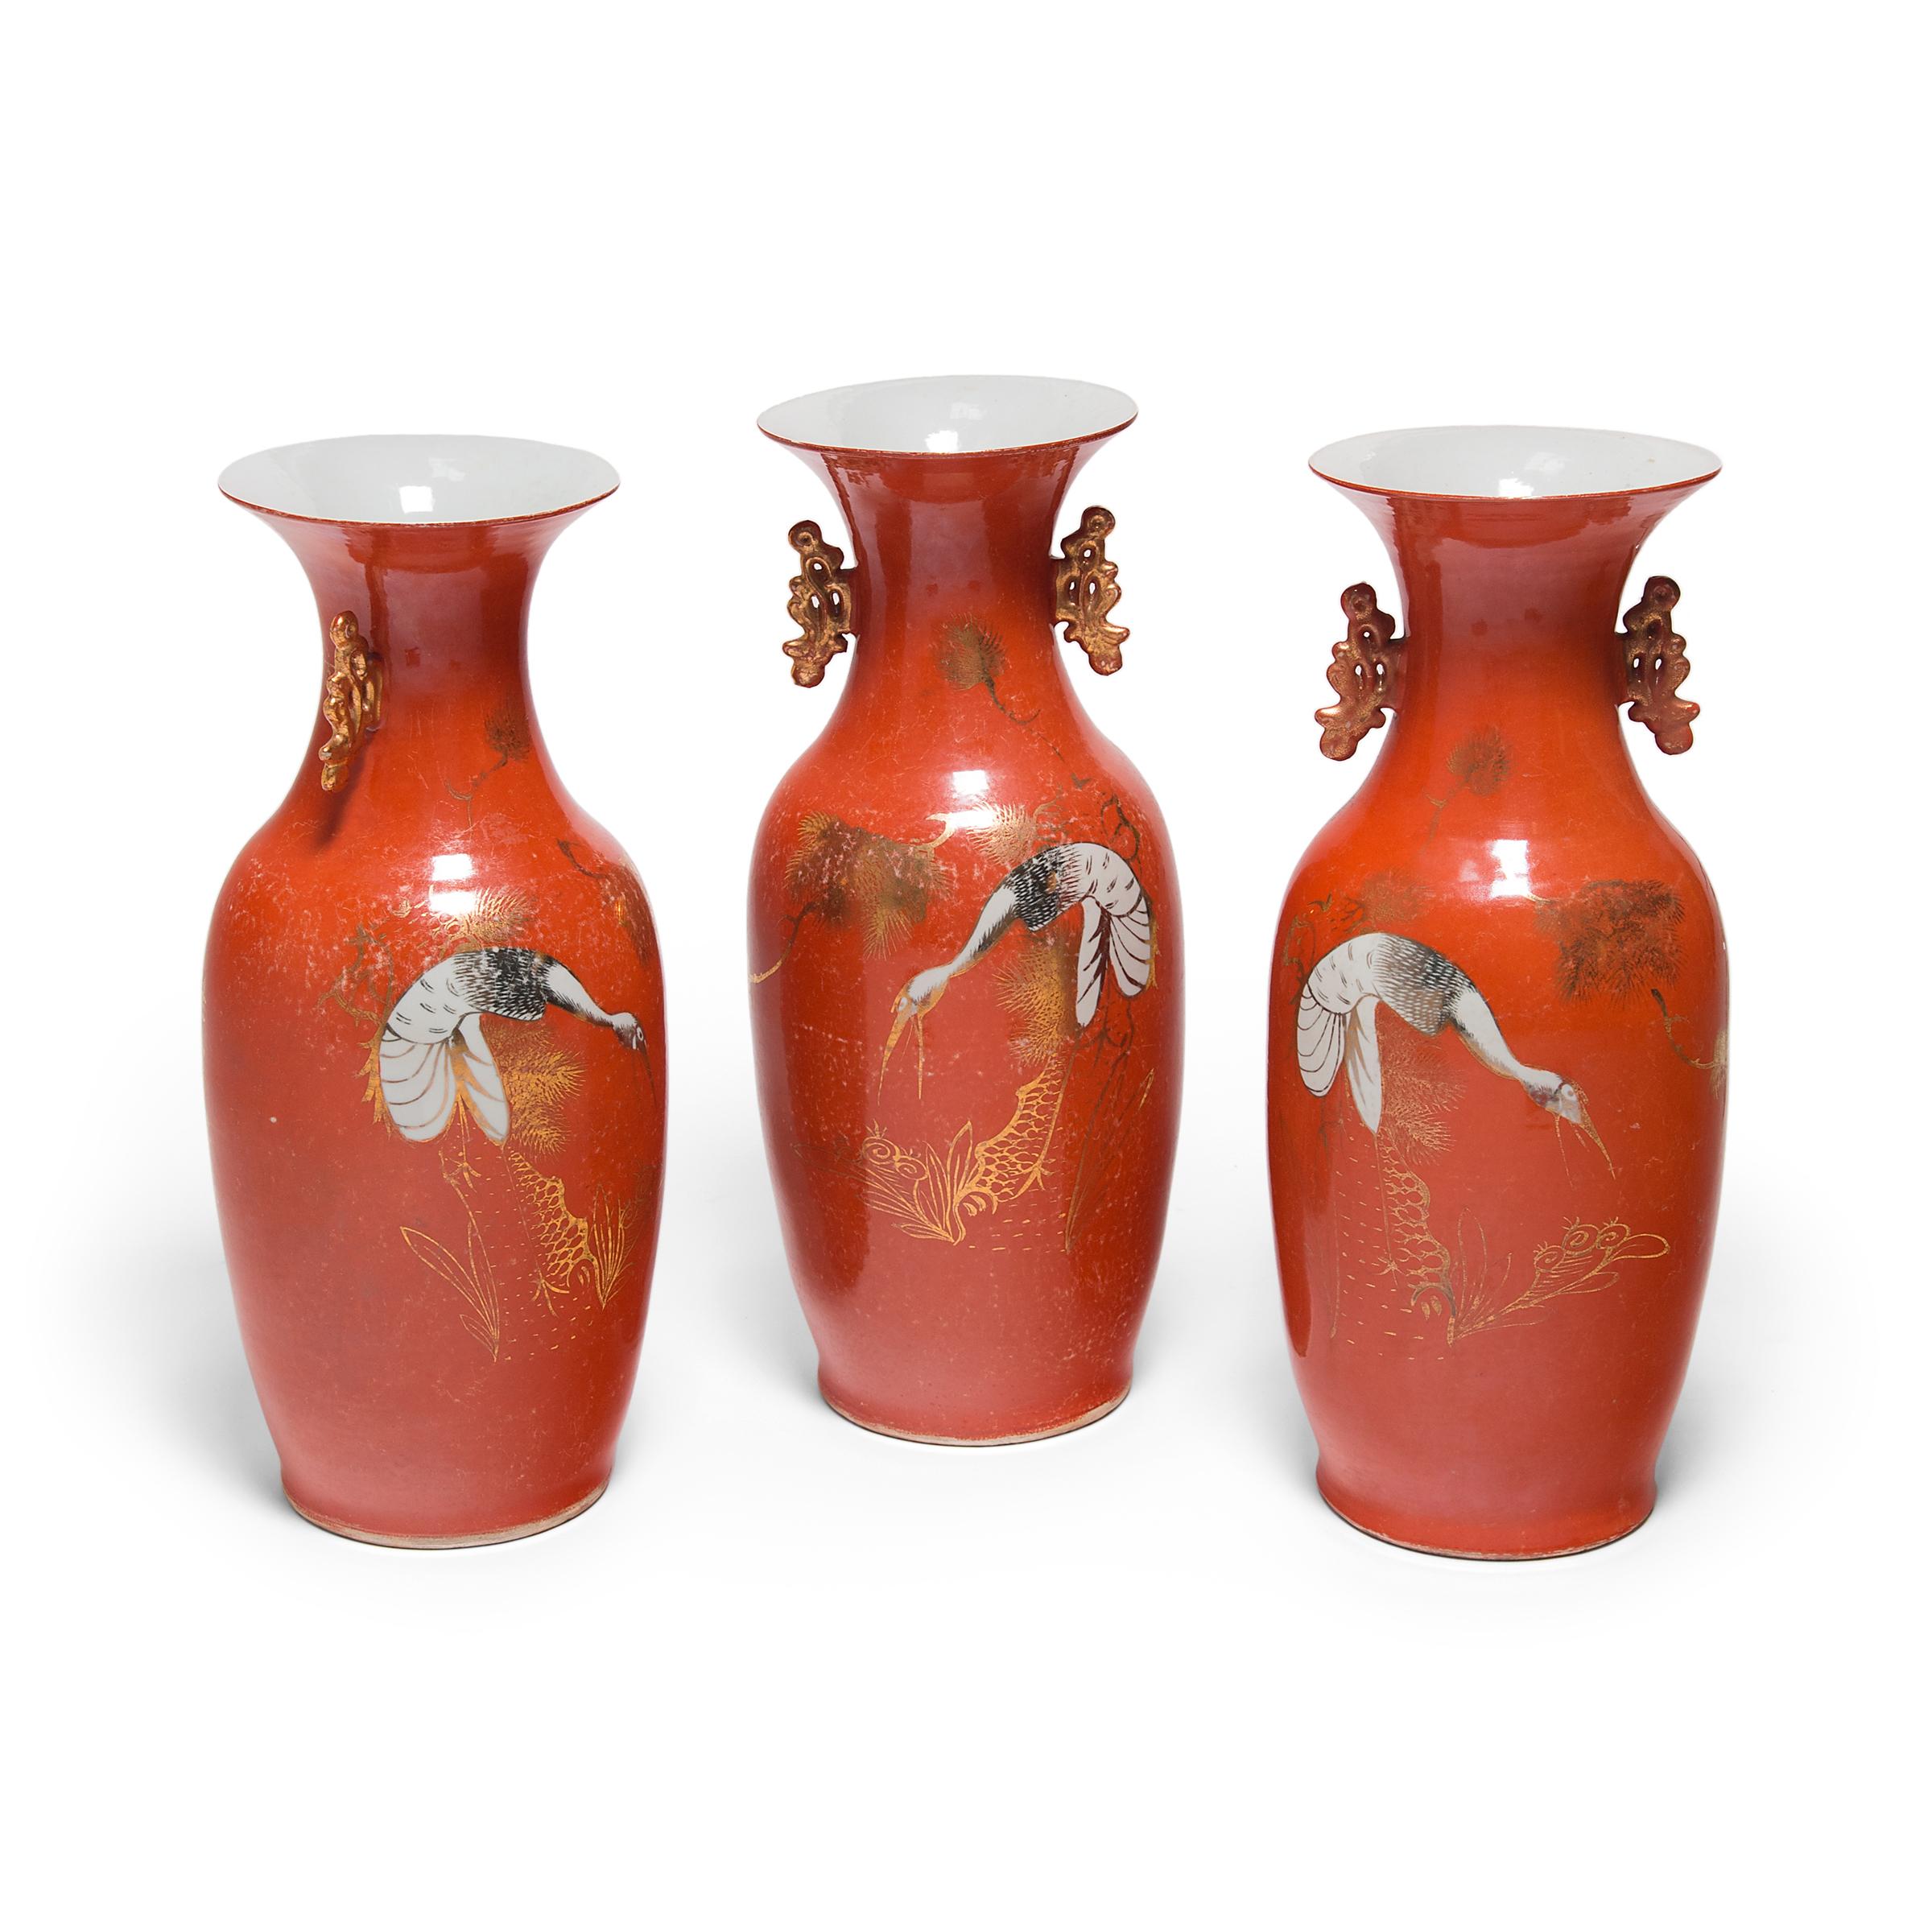 Chinese Art Deco Persimmon Vase with White Cranes, circa 1920s For Sale 1